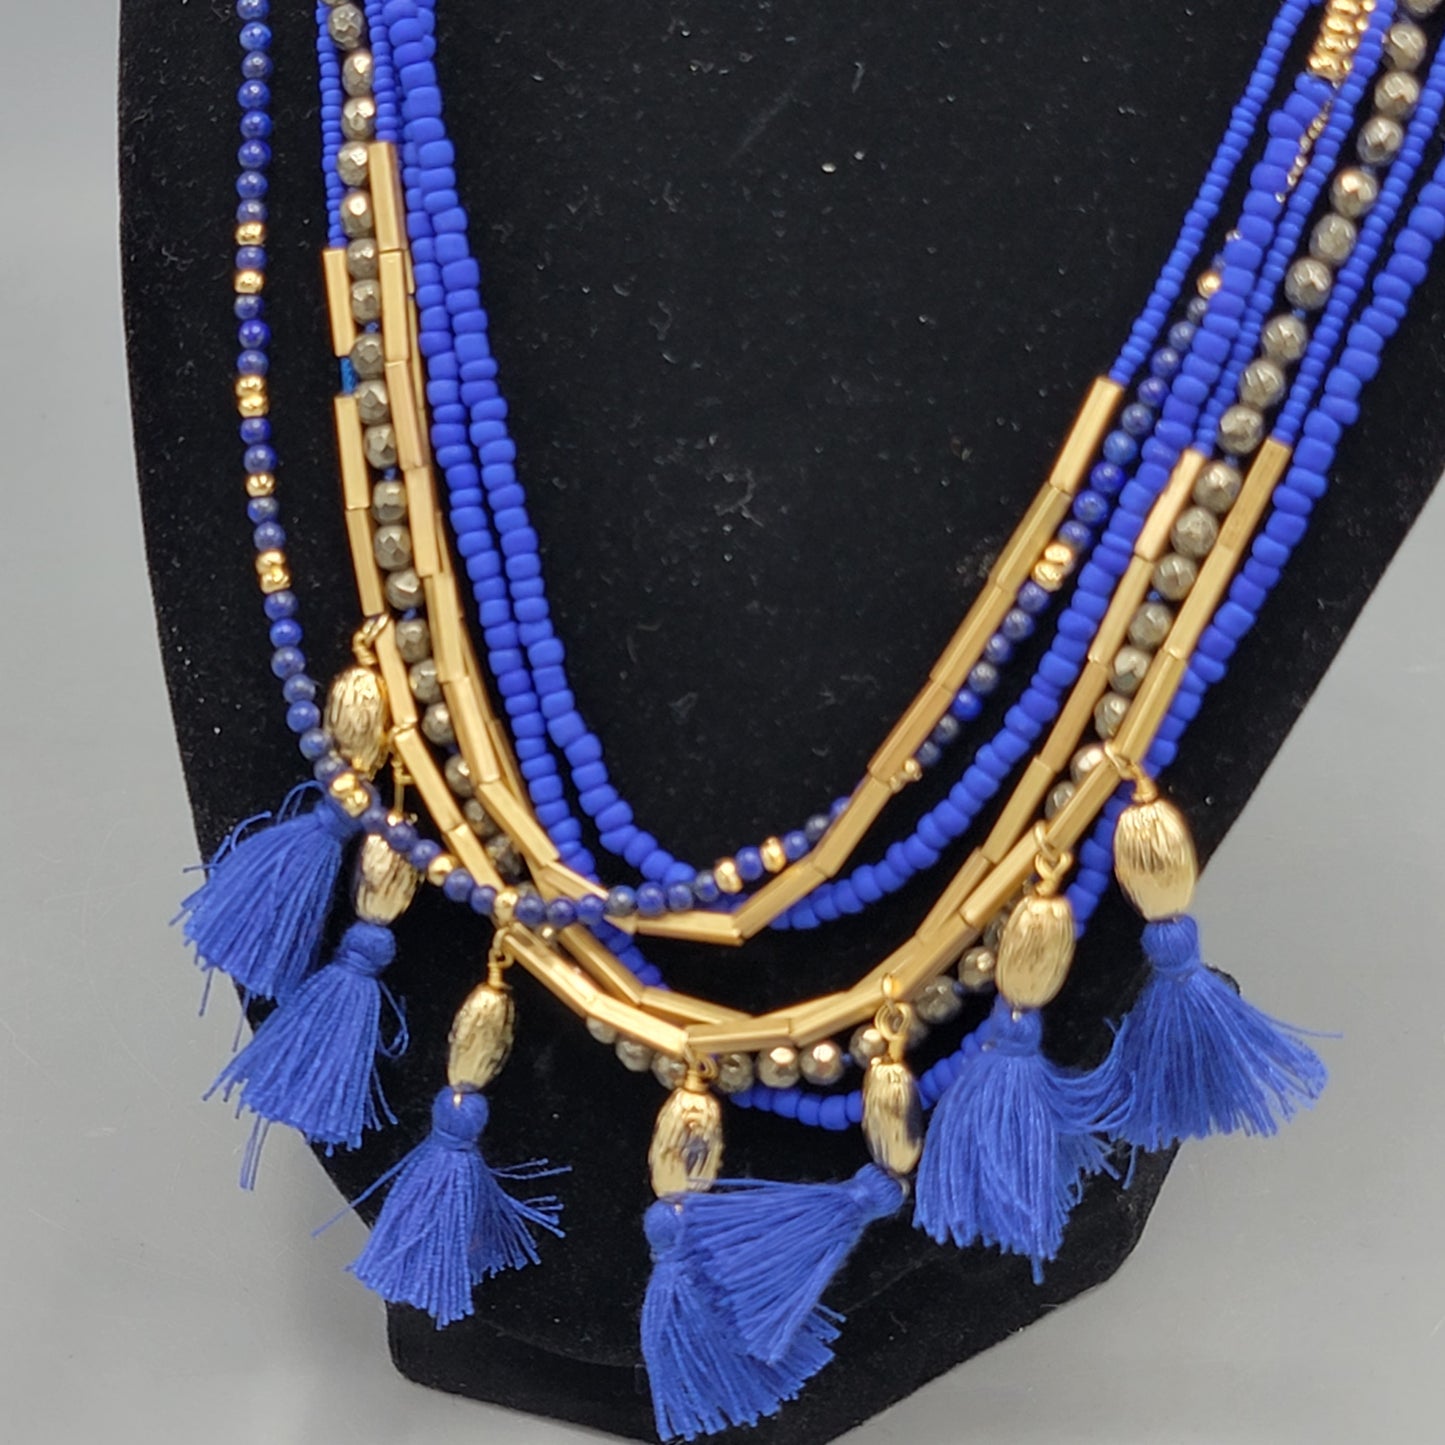 Stella and Dot Multi-strand Necklace - Blue Beads and Tassels and Gold